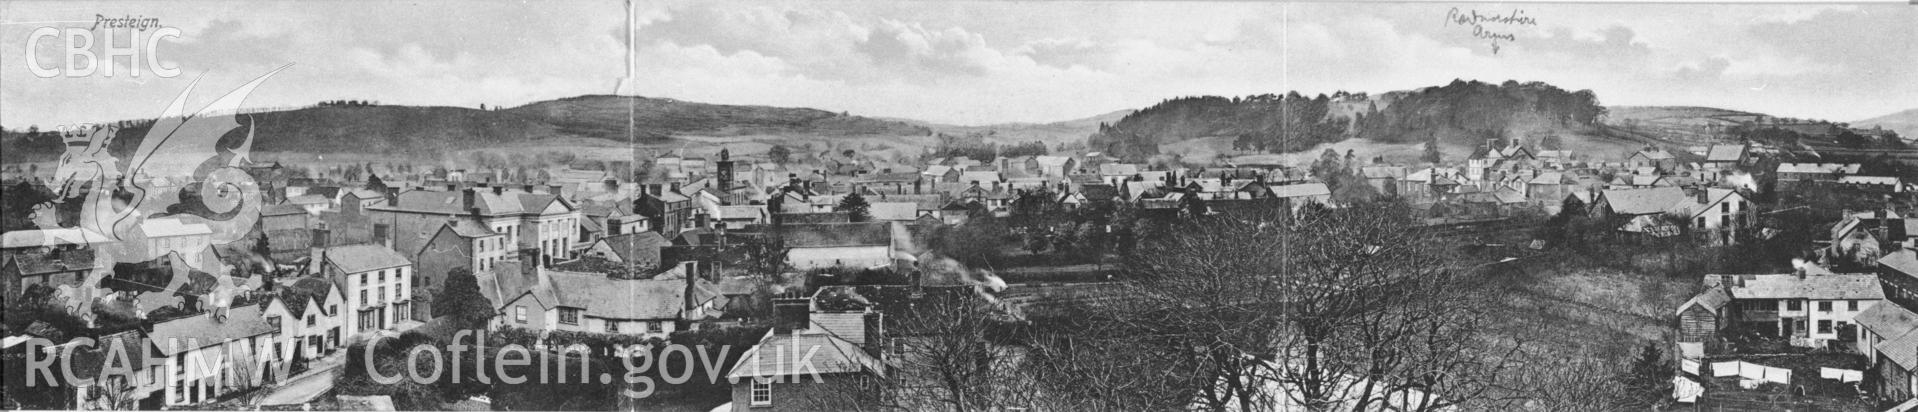 Copy of early postcard showing panoramic view of Presteigne town